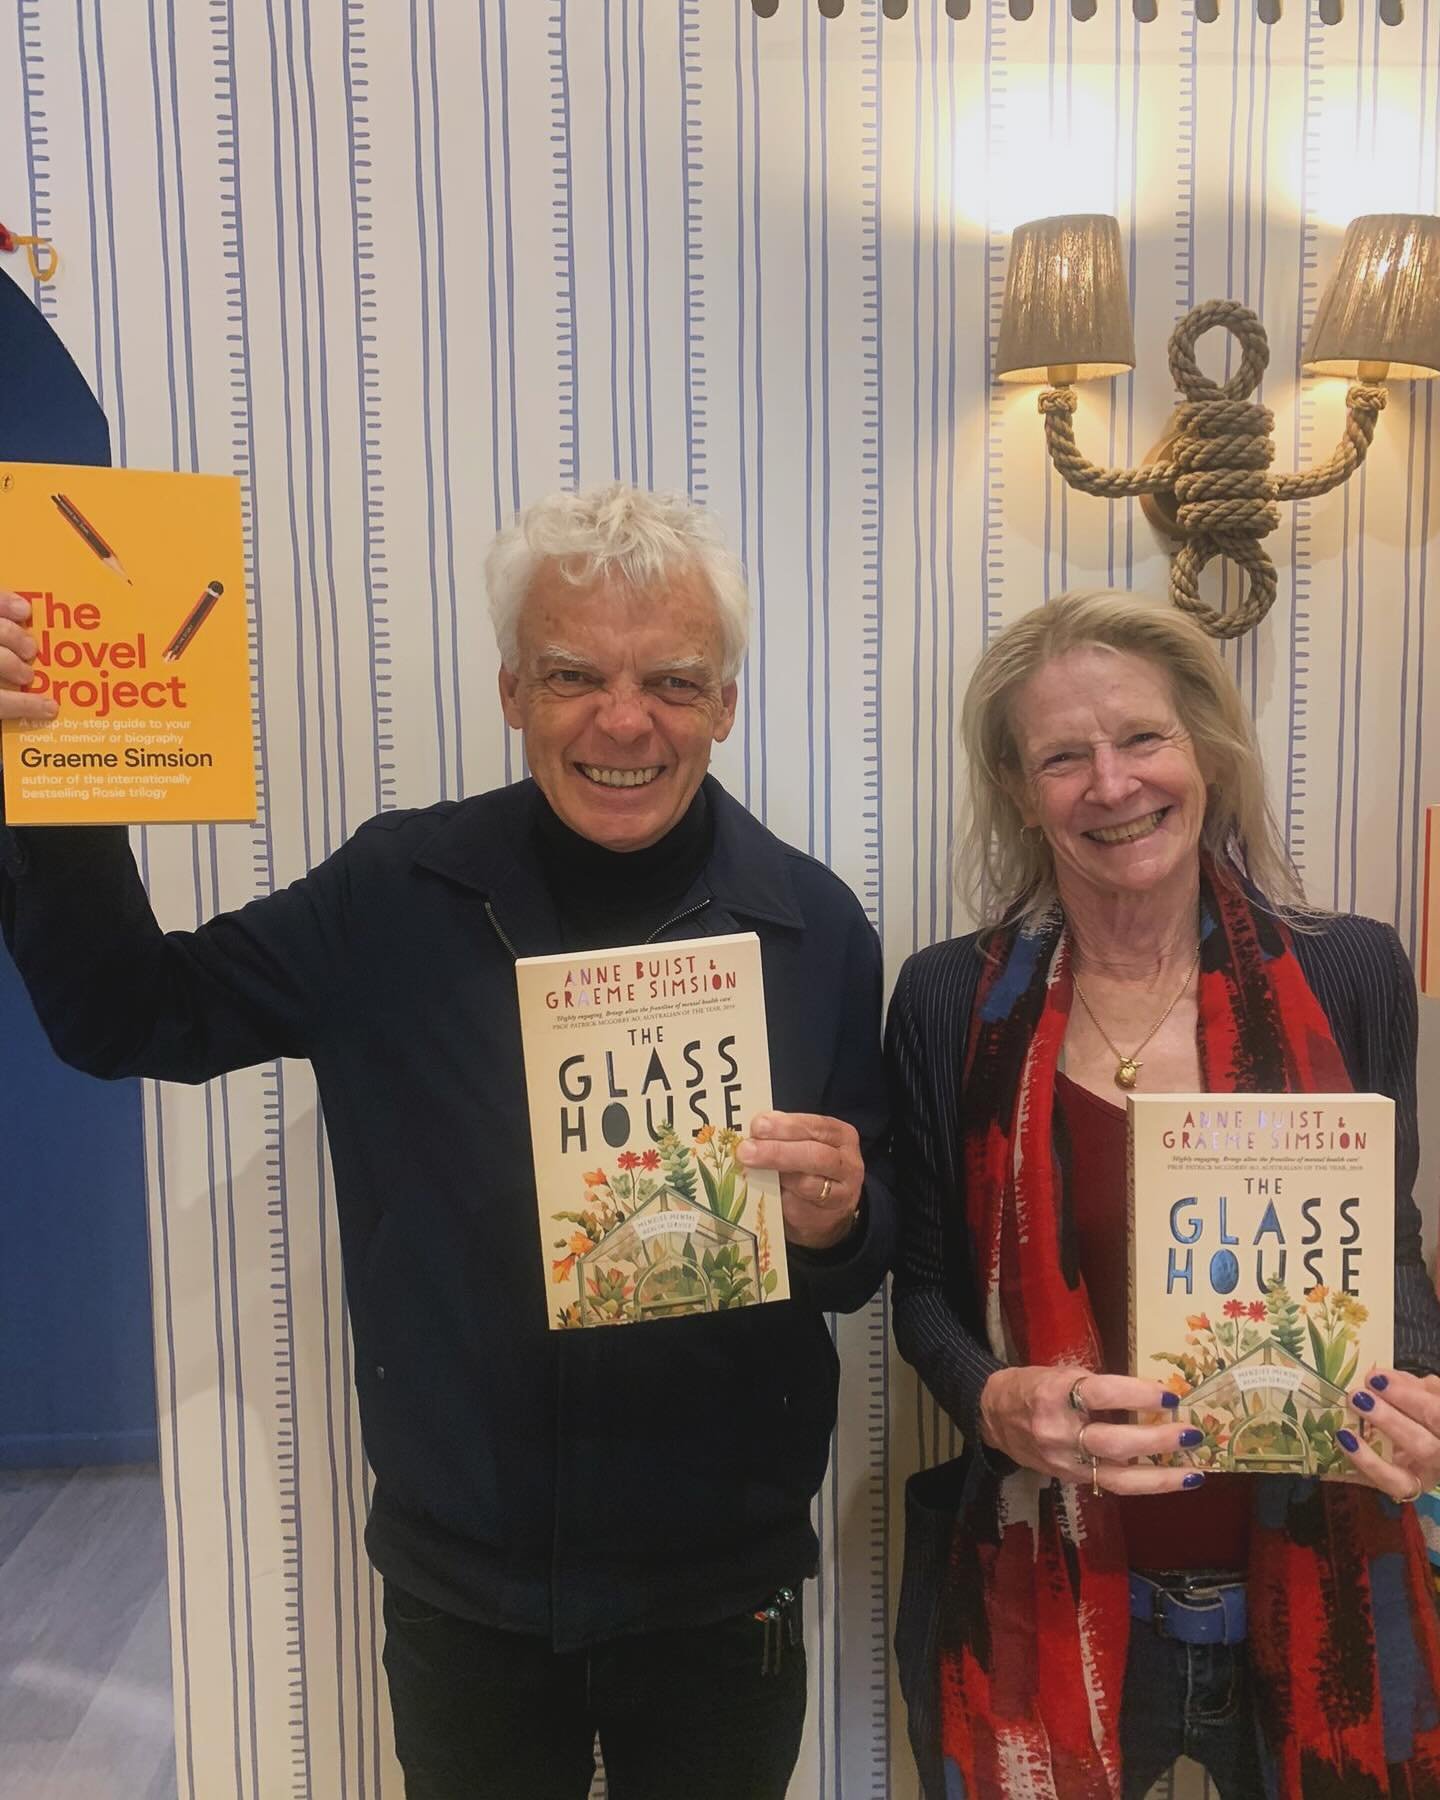 Delightful husband and wife duo Graeme Simsion and Anne Buist dropped in yesterday on their grand bookstore tour of Australia! Together they have co-written The Glasshouse - a rare slice of Australian medical fiction set in a psychiatric ward. Writte